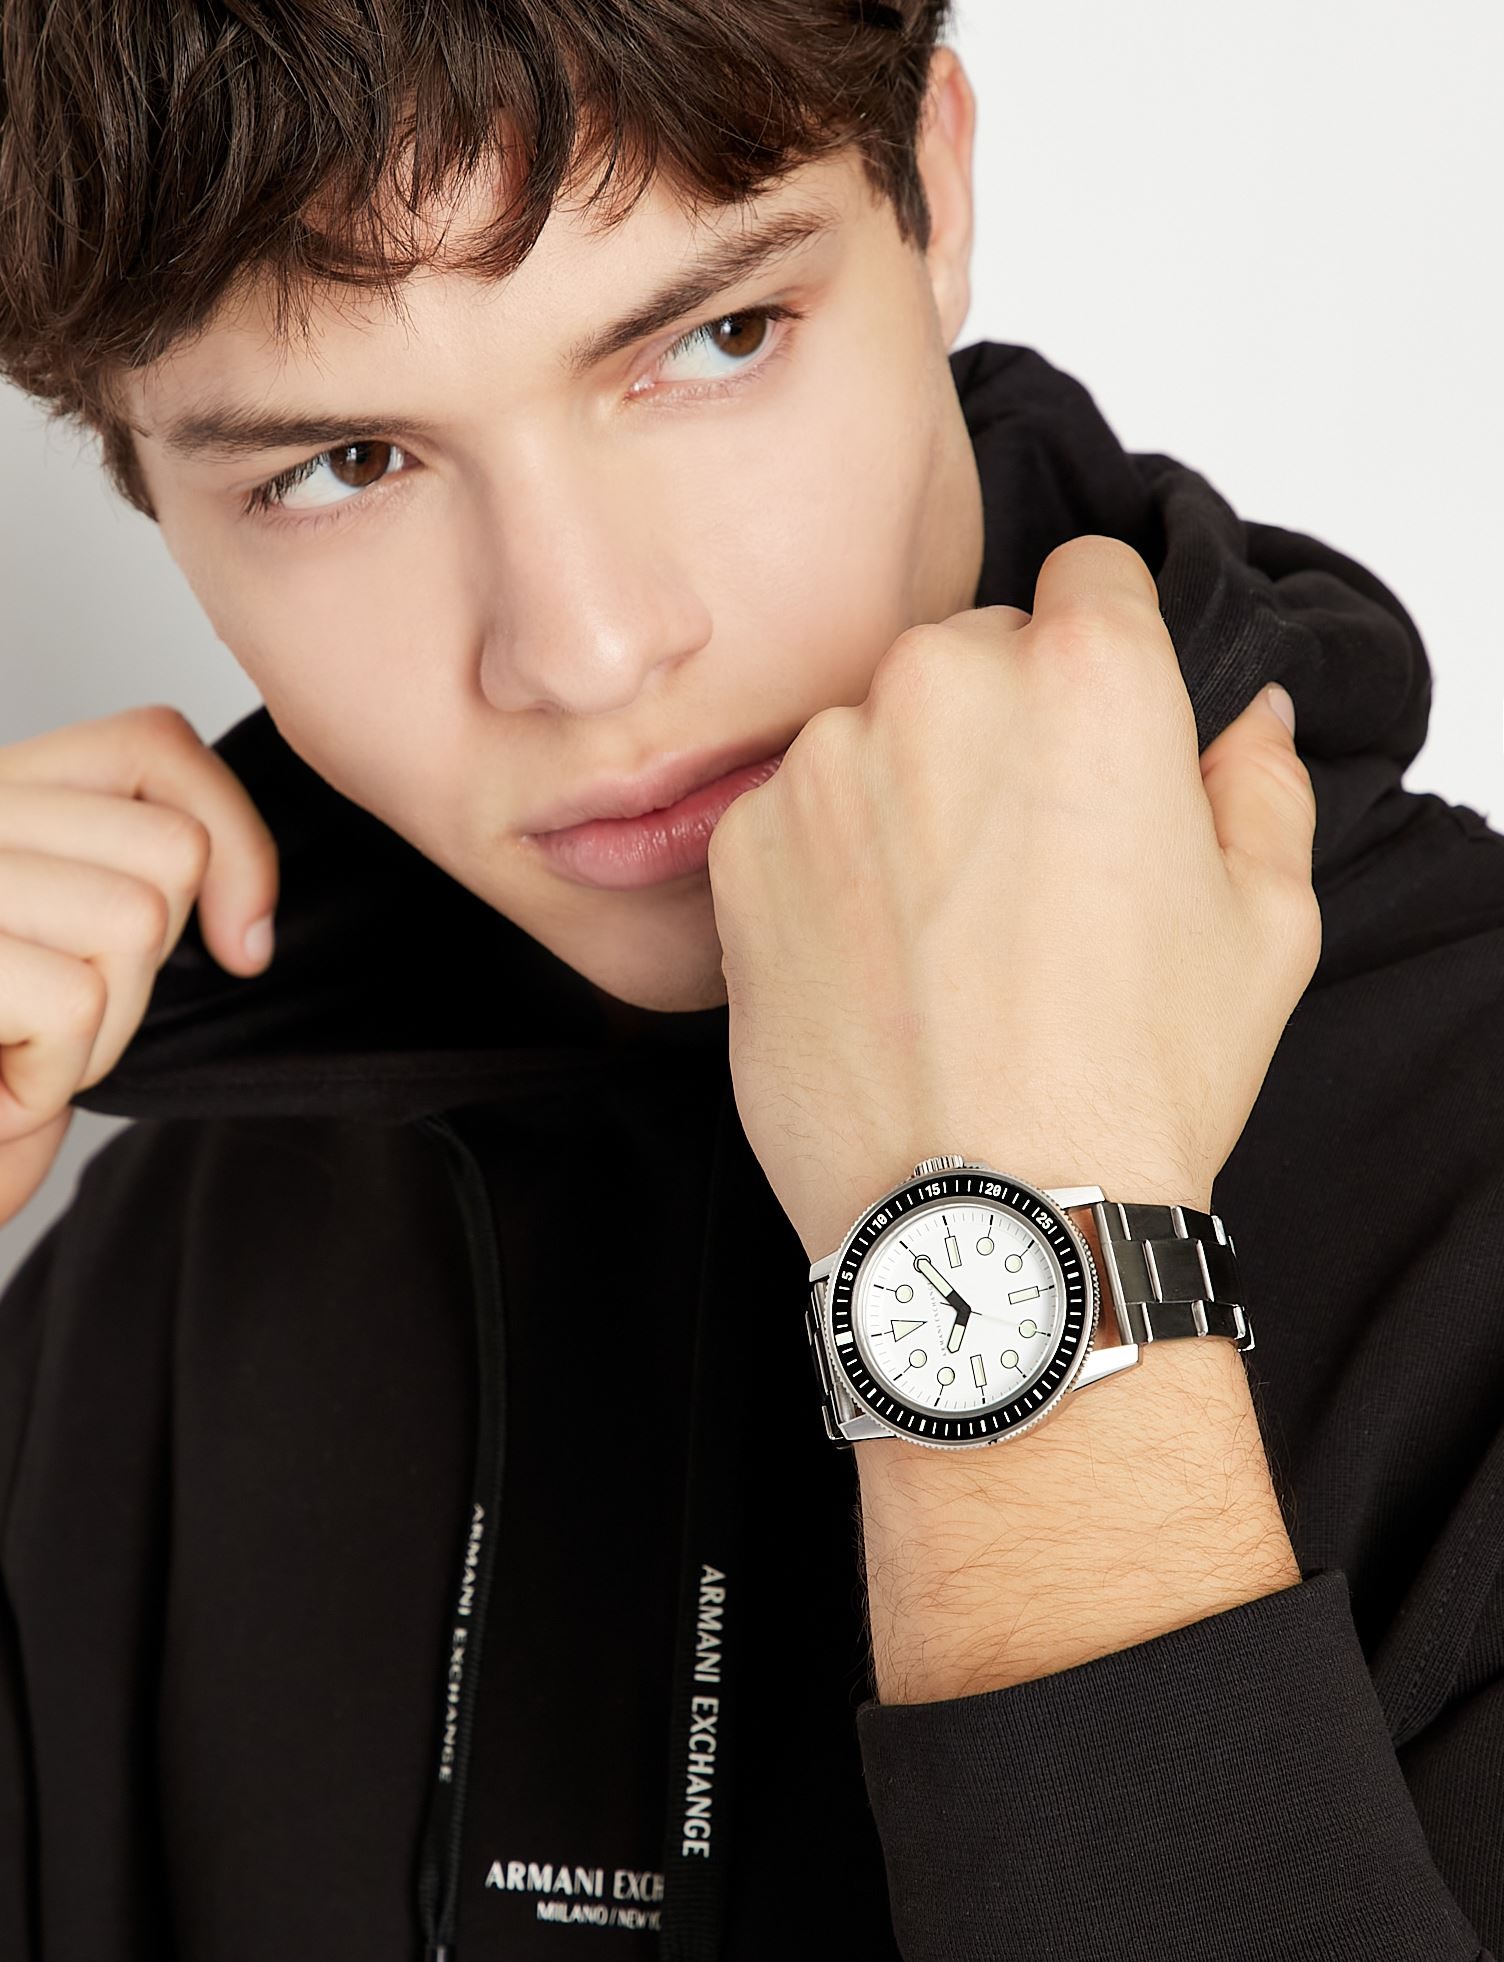 Armani Exchange AX1853 Watch - Tramps the Store